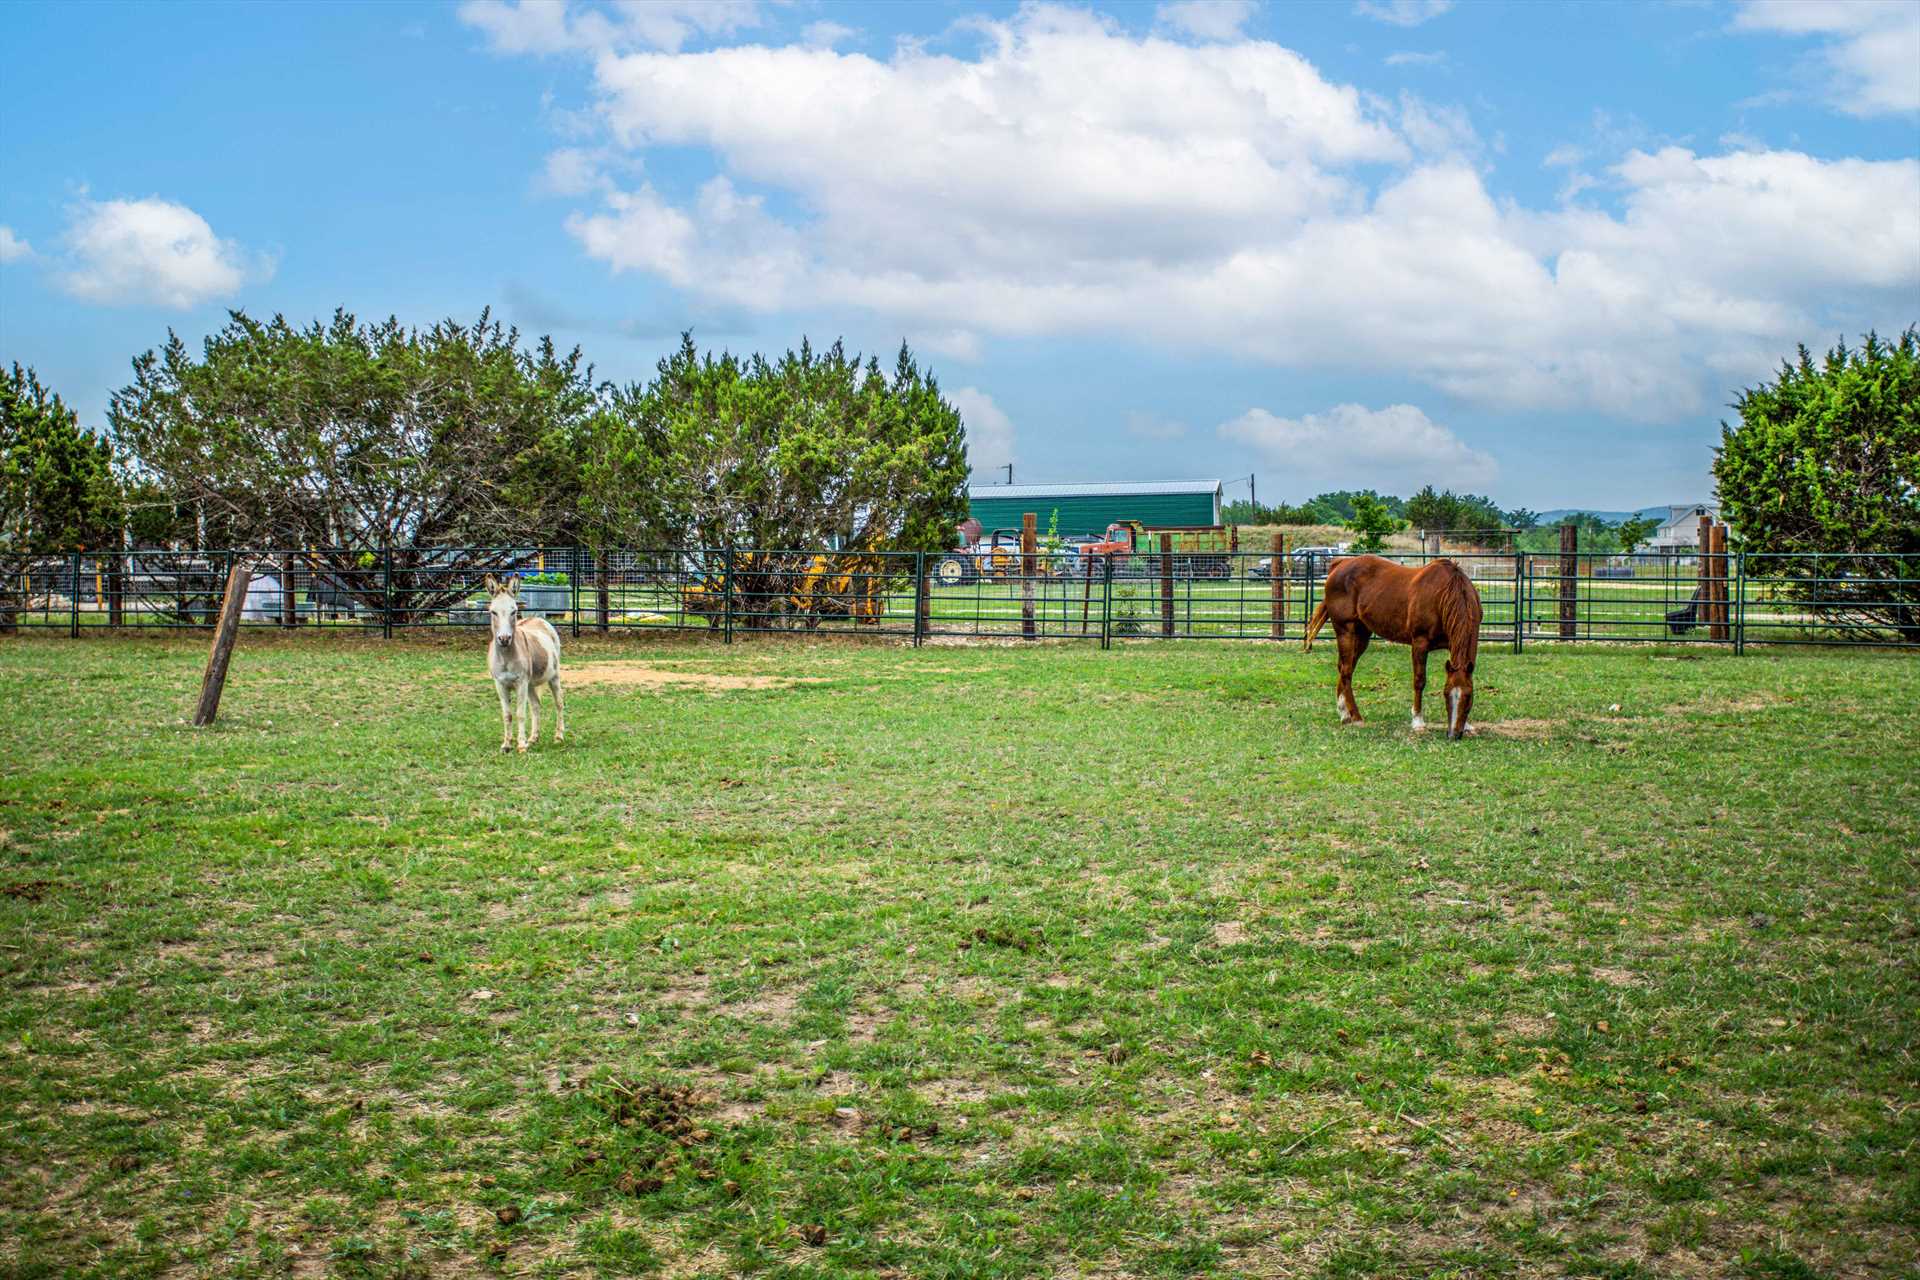                                                 Sassy and Red Duke call this neck of the Hill Country home, and chances are they'll welcome you when you arrive!